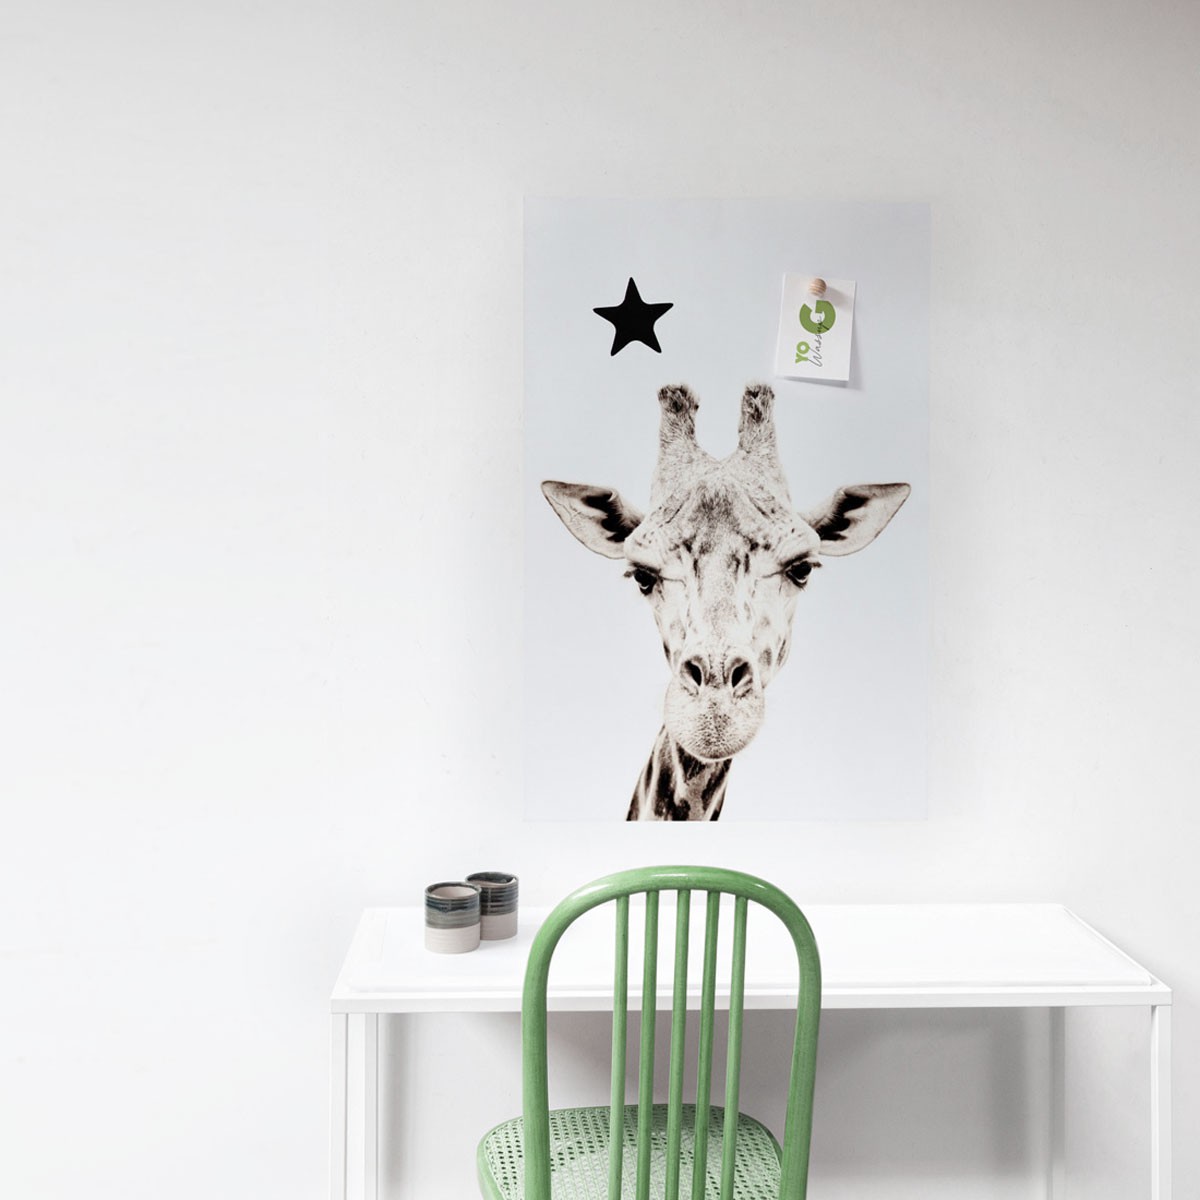 Magnetic wall sticker by Groovy Magnets - adhesive wall sticker with giraffe